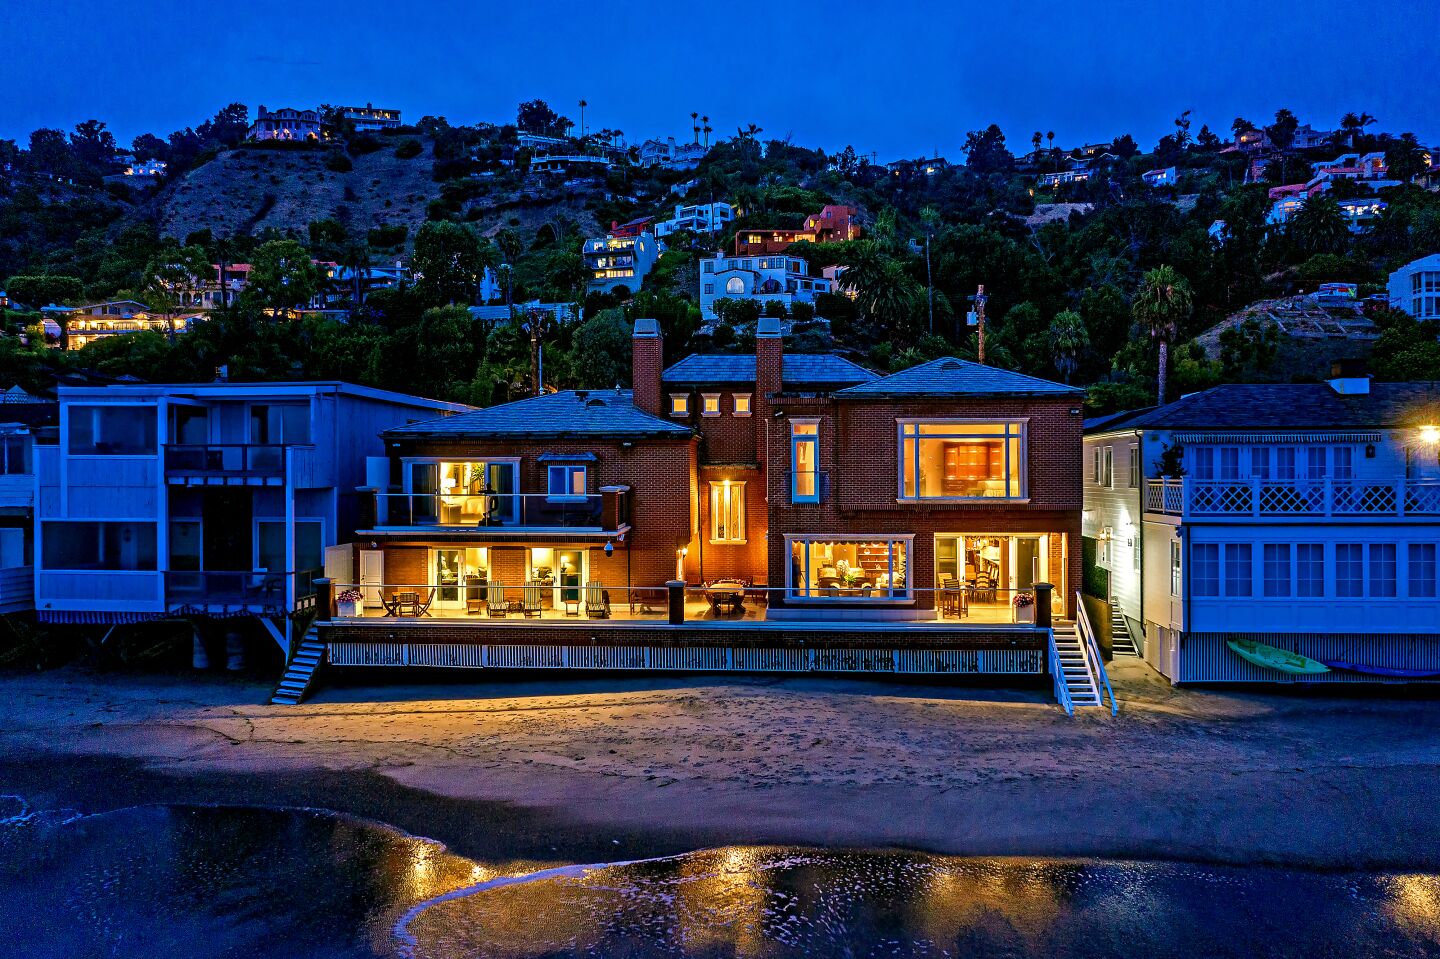 Socialite Candy Spelling has listed her oceanfront home in Malibu for sale at $23 million. The brick-clad residence sits on 81 feet of beach frontage on La Costa Beach.